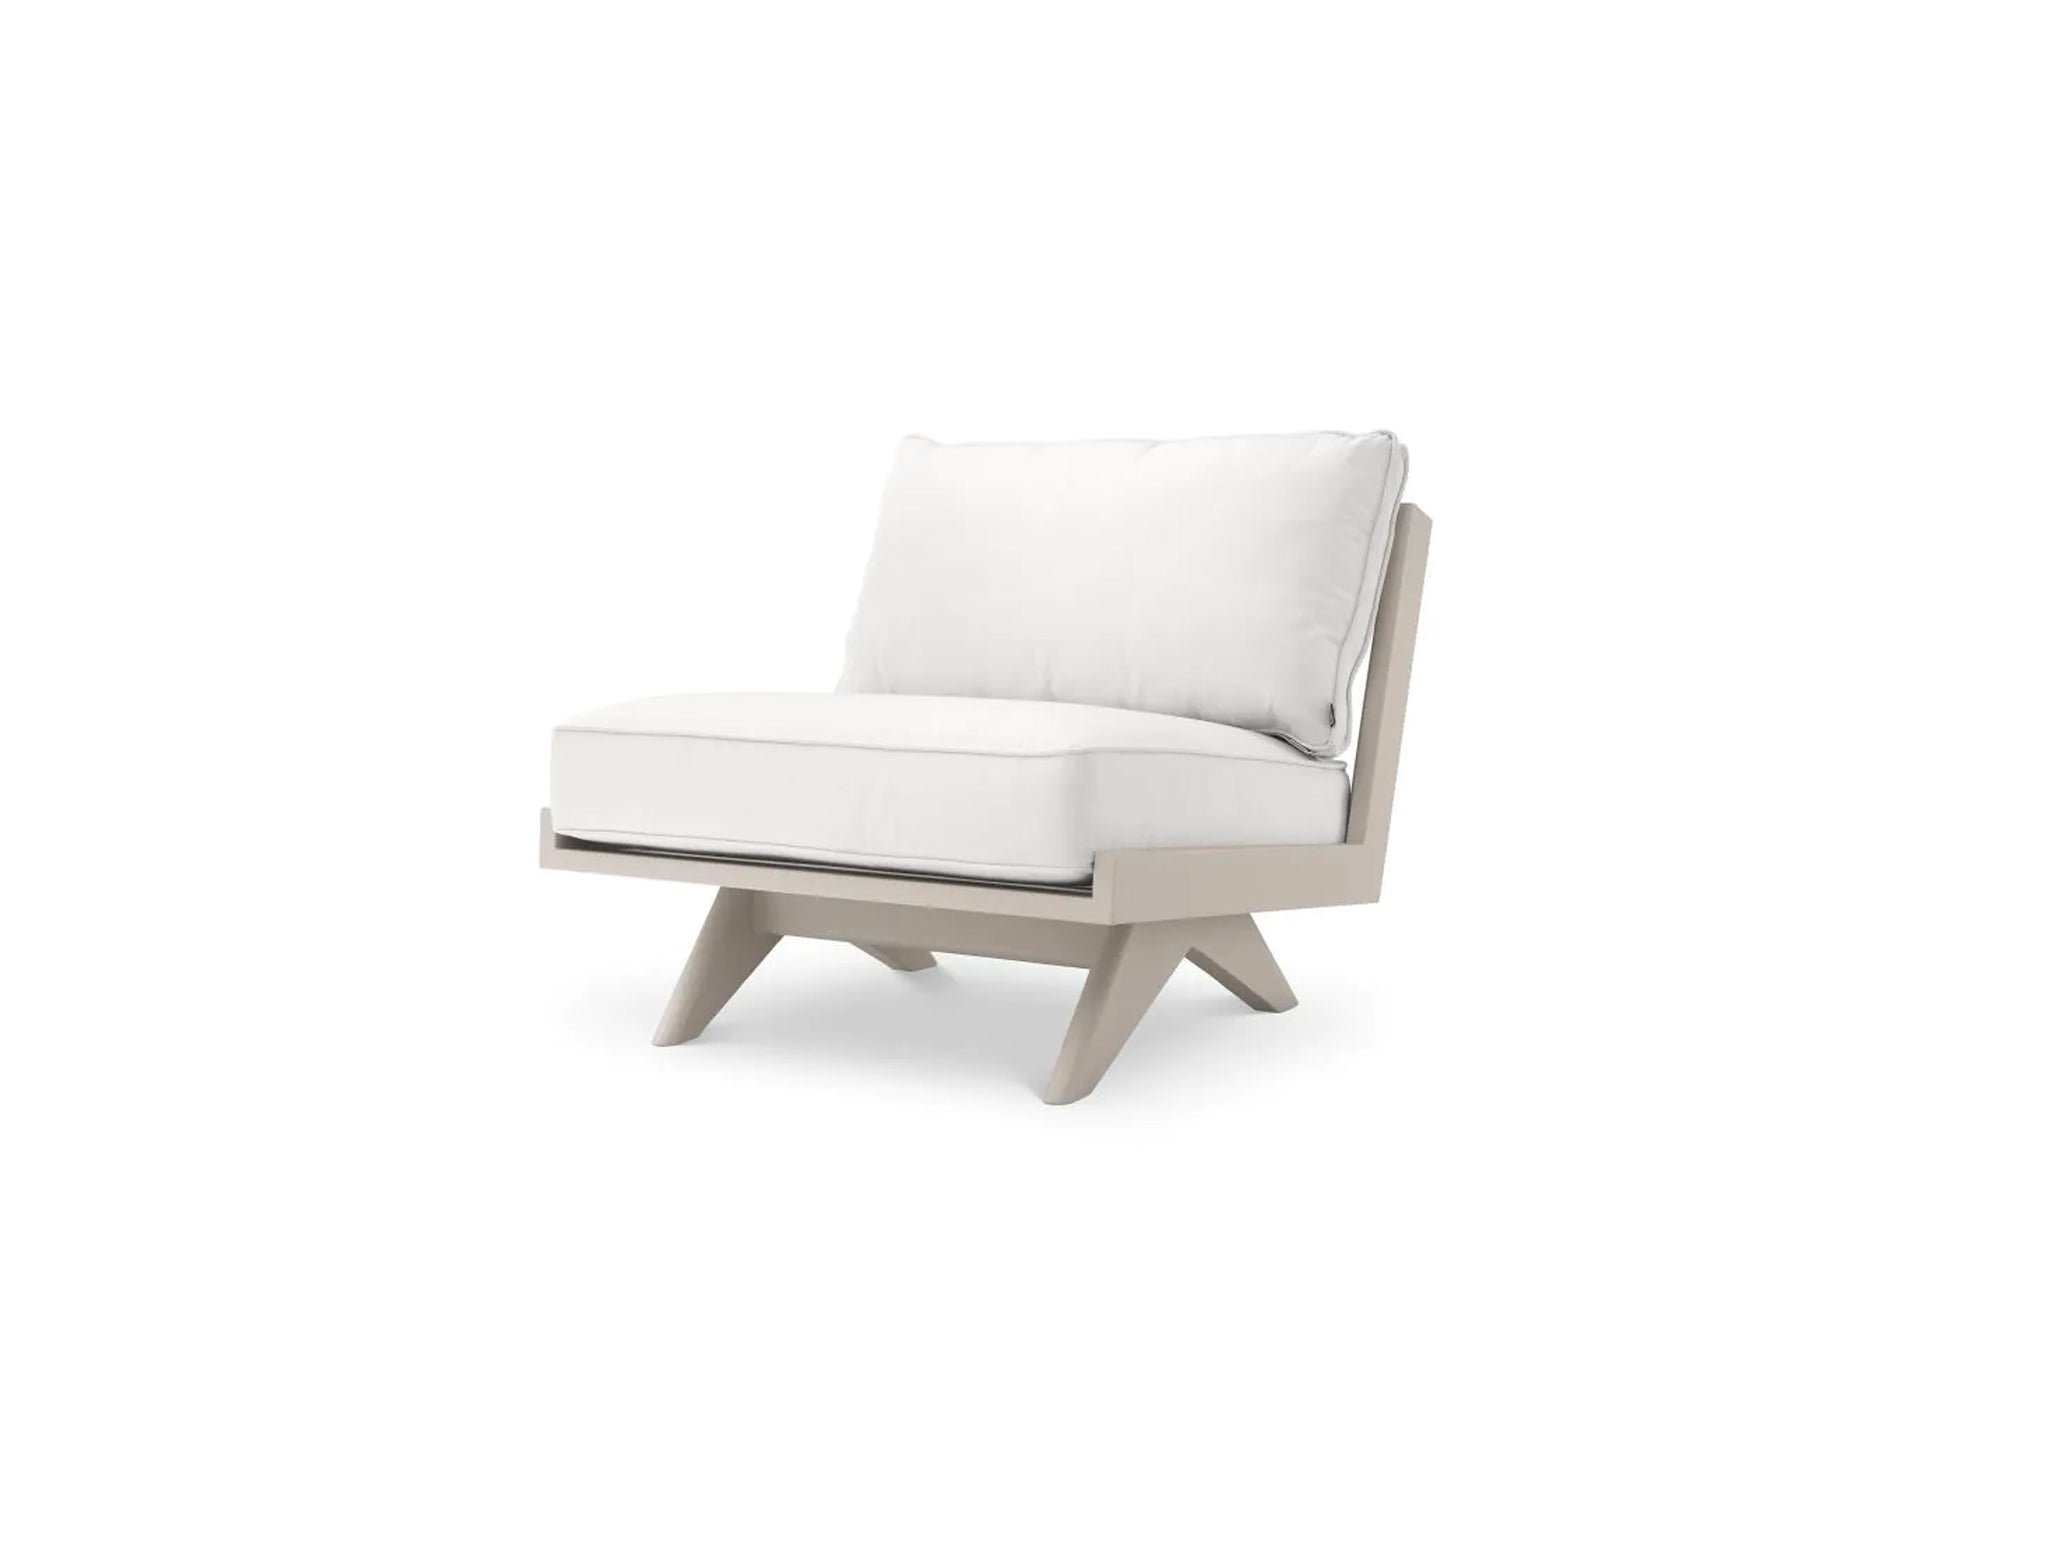 Lomax Outdoor Lounge Chair